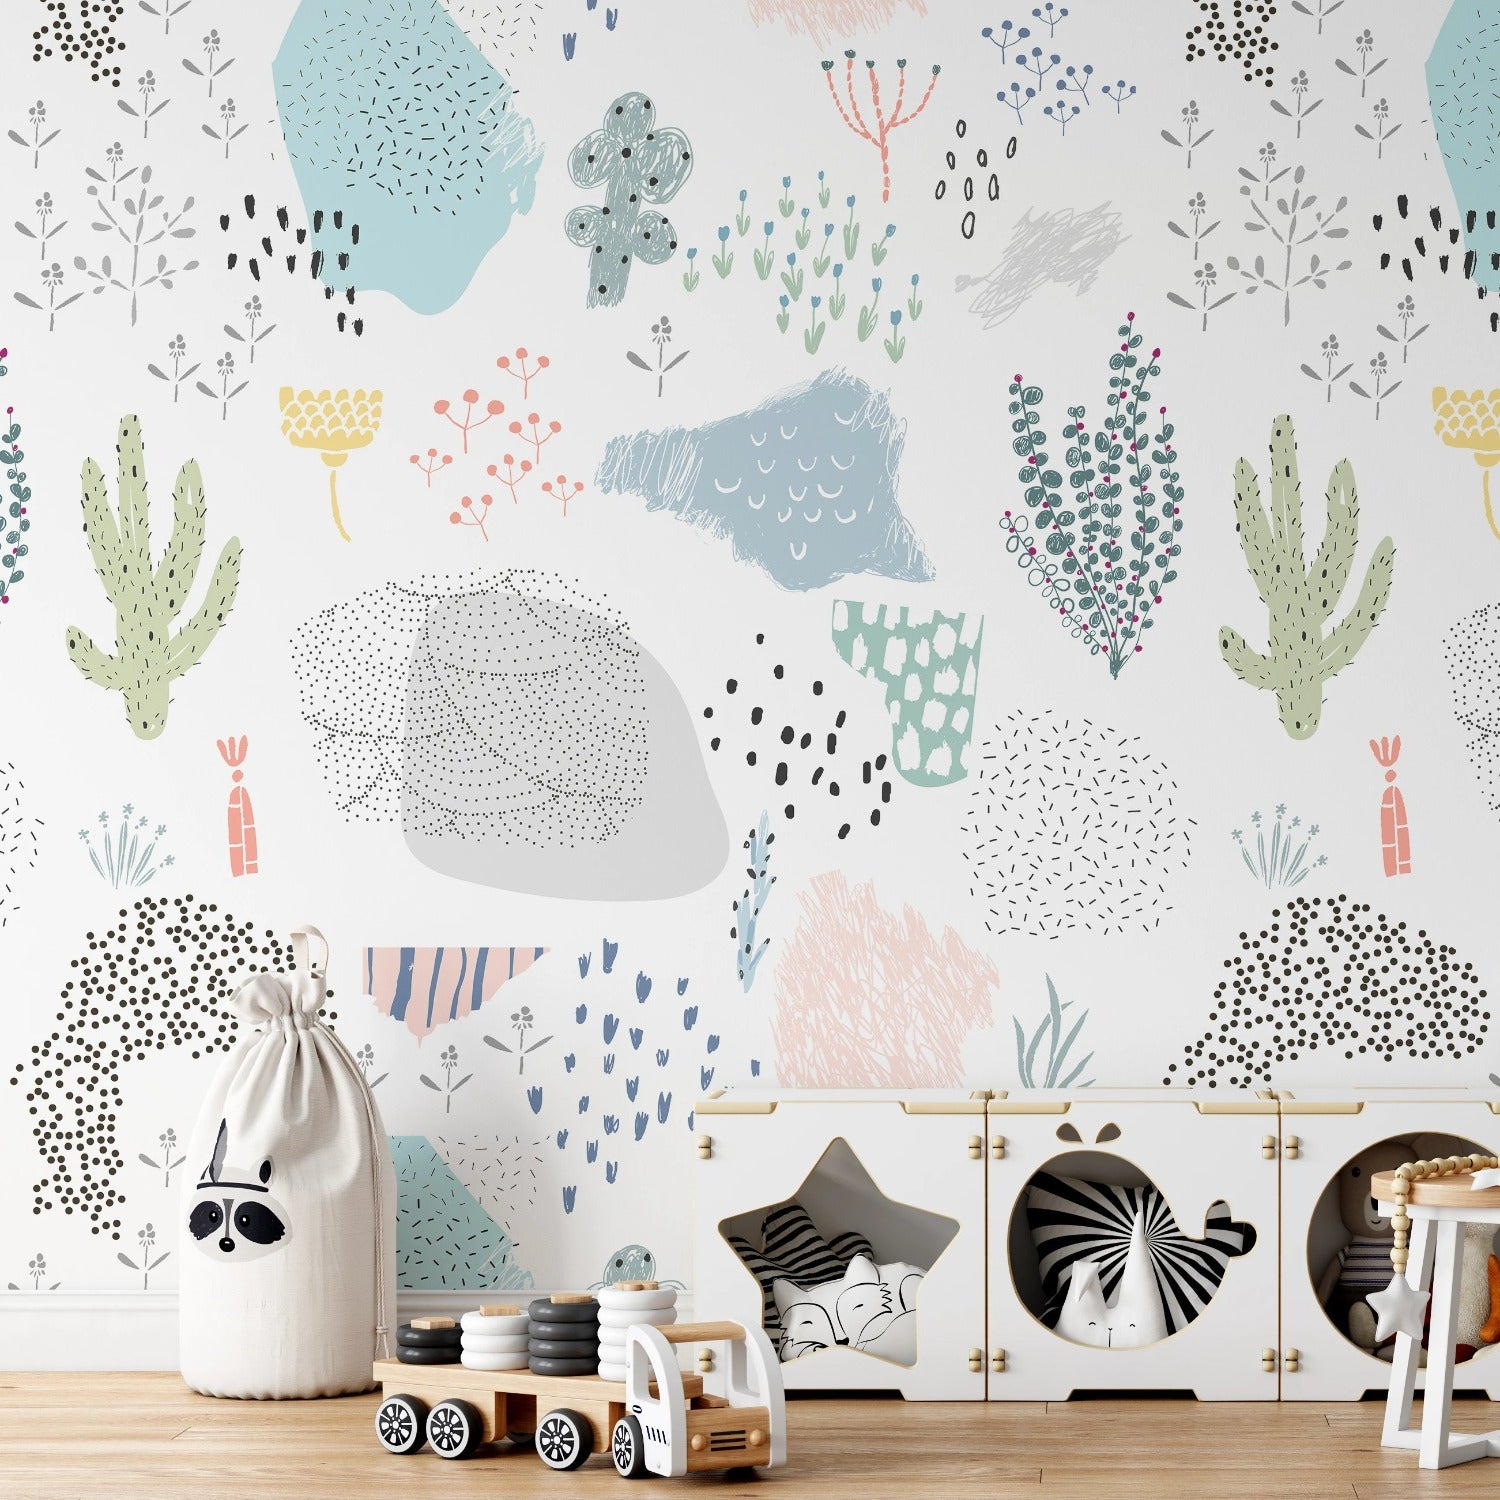 Children's room decorated with Kids Wallpaper - Doodles, showcasing playful doodles of plants, cacti, and abstract shapes in soft pastel colors on a white background.